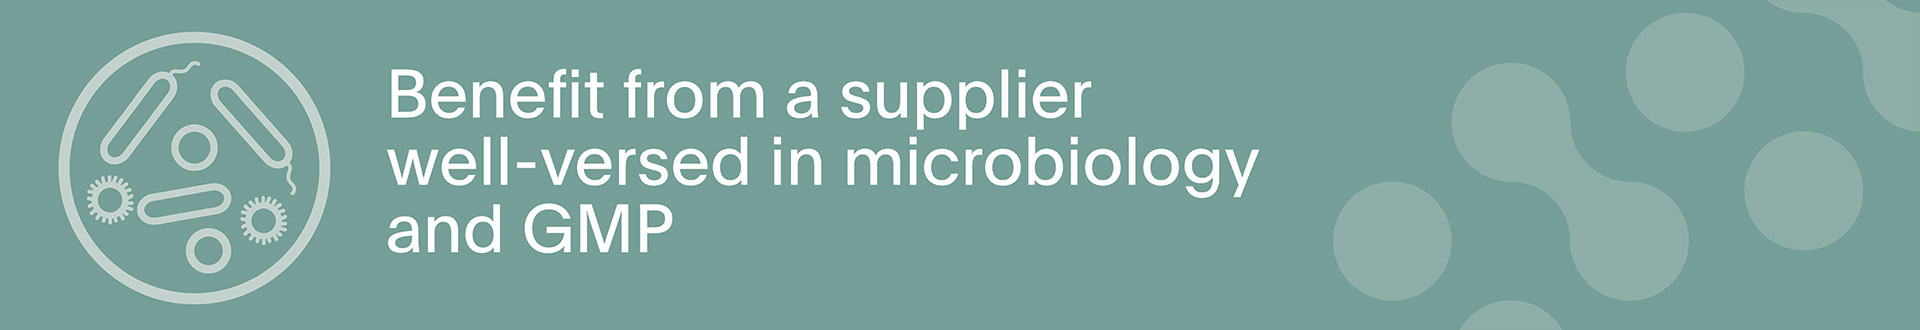 Benefit from a supplier wellversed in microbiology and GMP